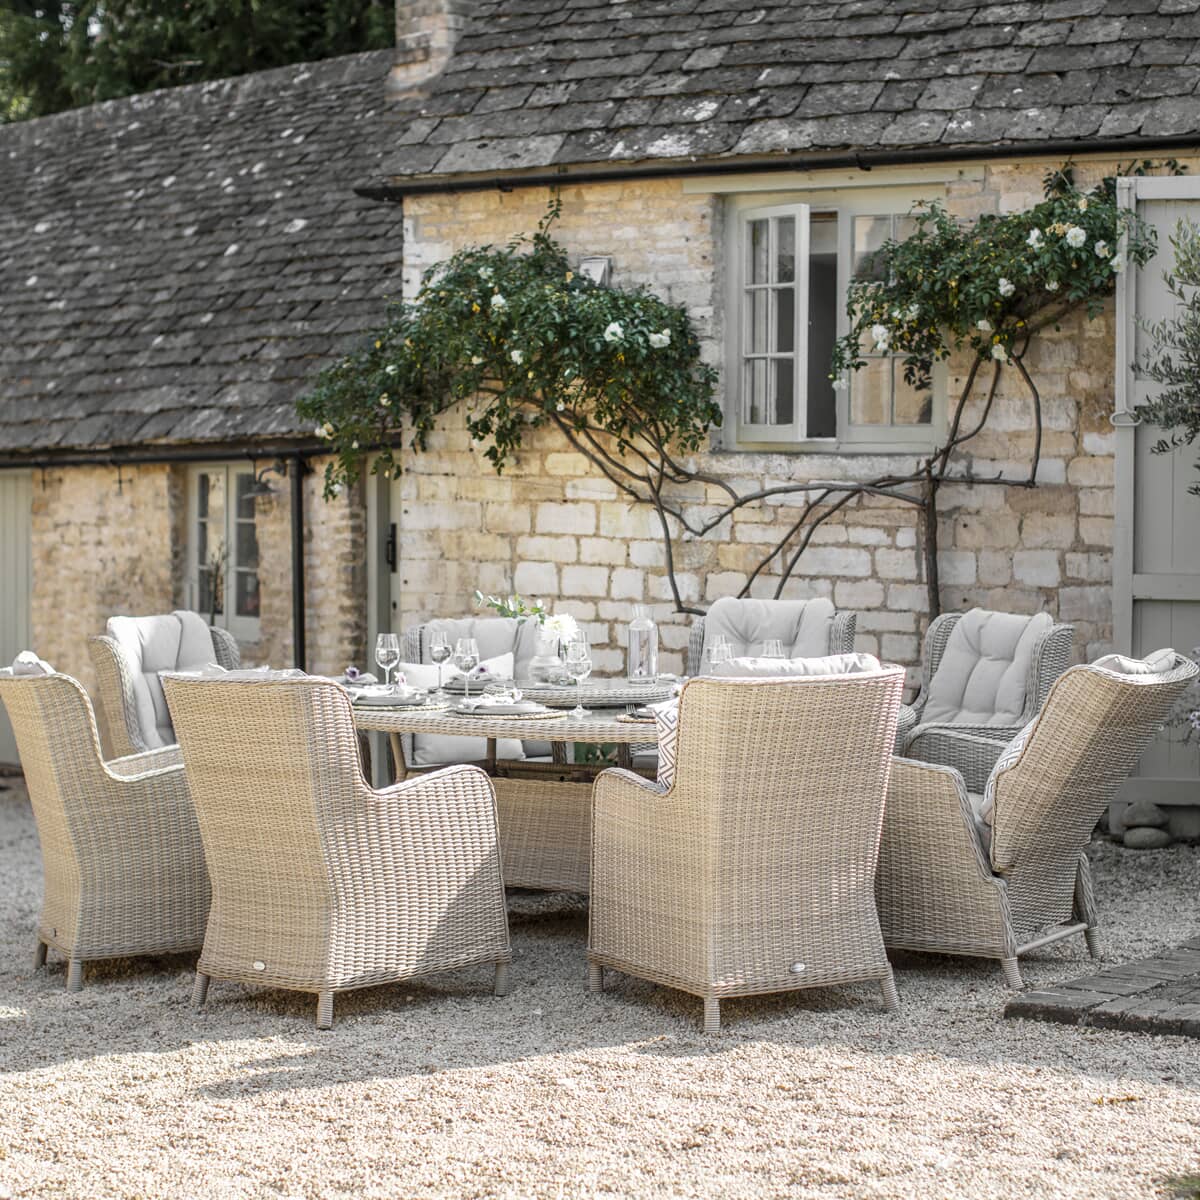 Bramblecrest Chedworth Sandstone 8 Seat Elliptical Dining Set with 2 Recliners